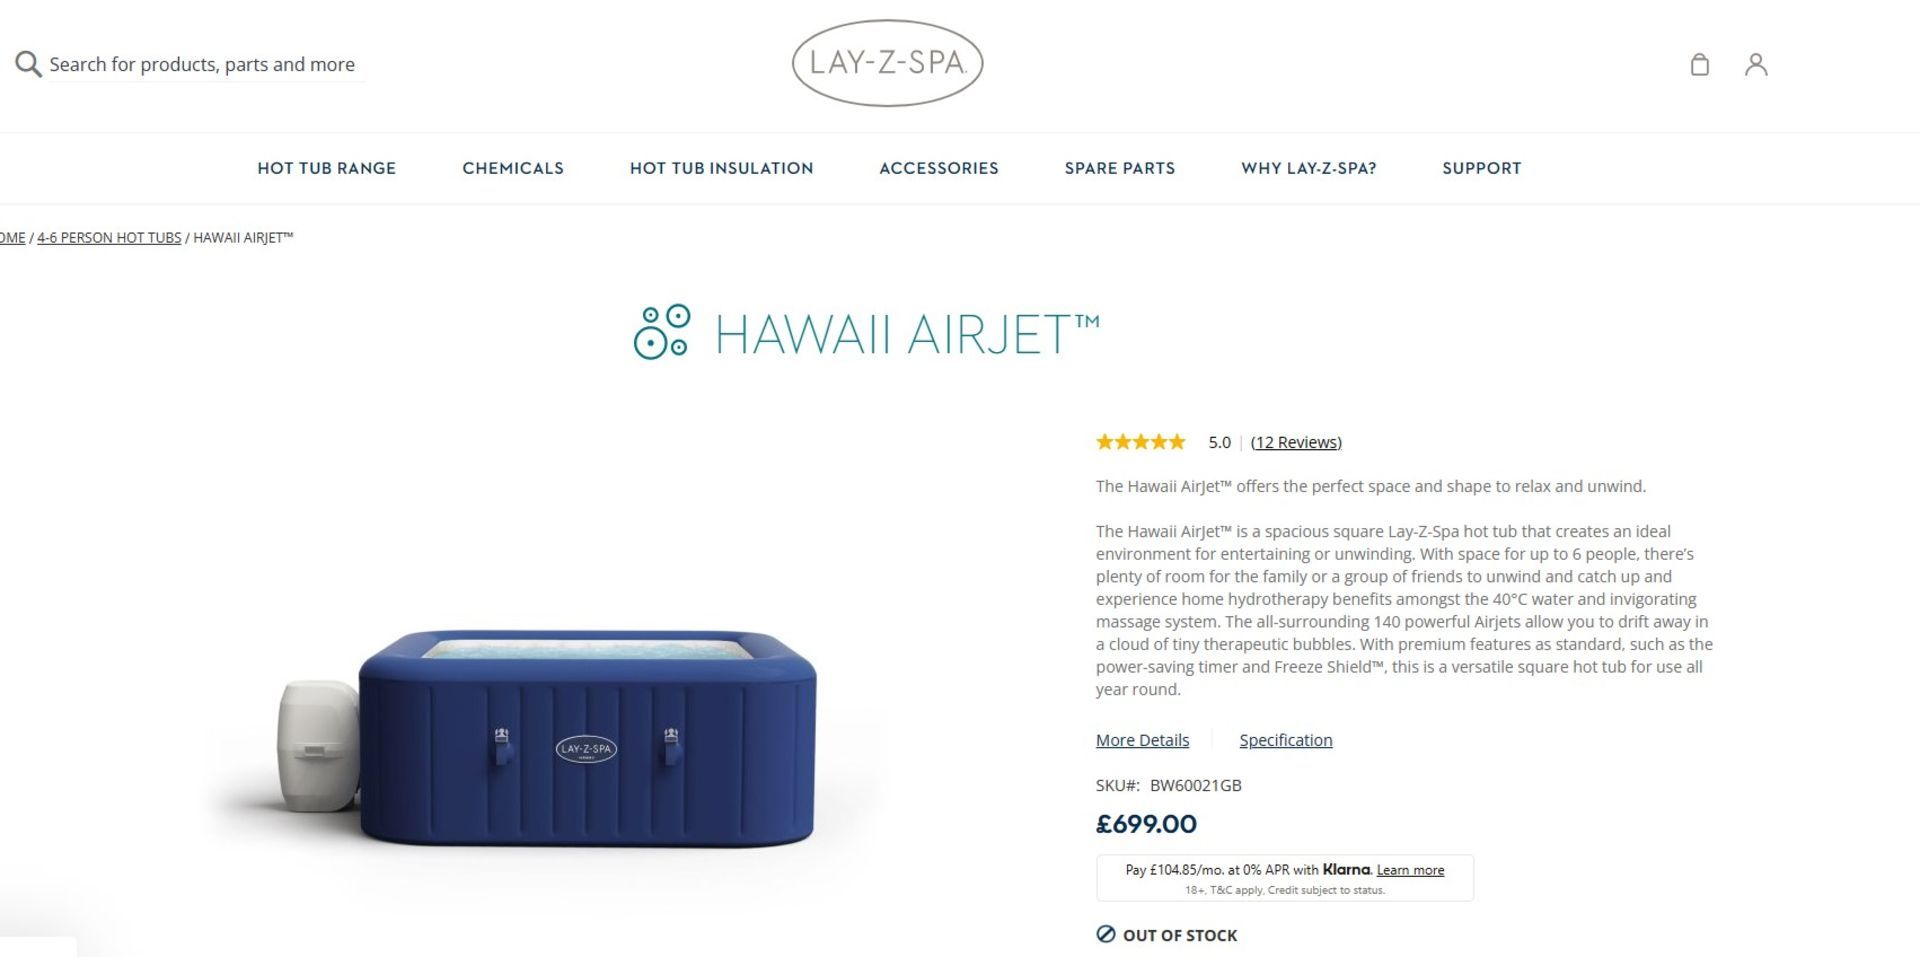 NEW & BOXED LAY-Z-SPA 6 PERSON HAWAII AIRJET. RRP £699. The Hawaii AirJet™ offers the perfect